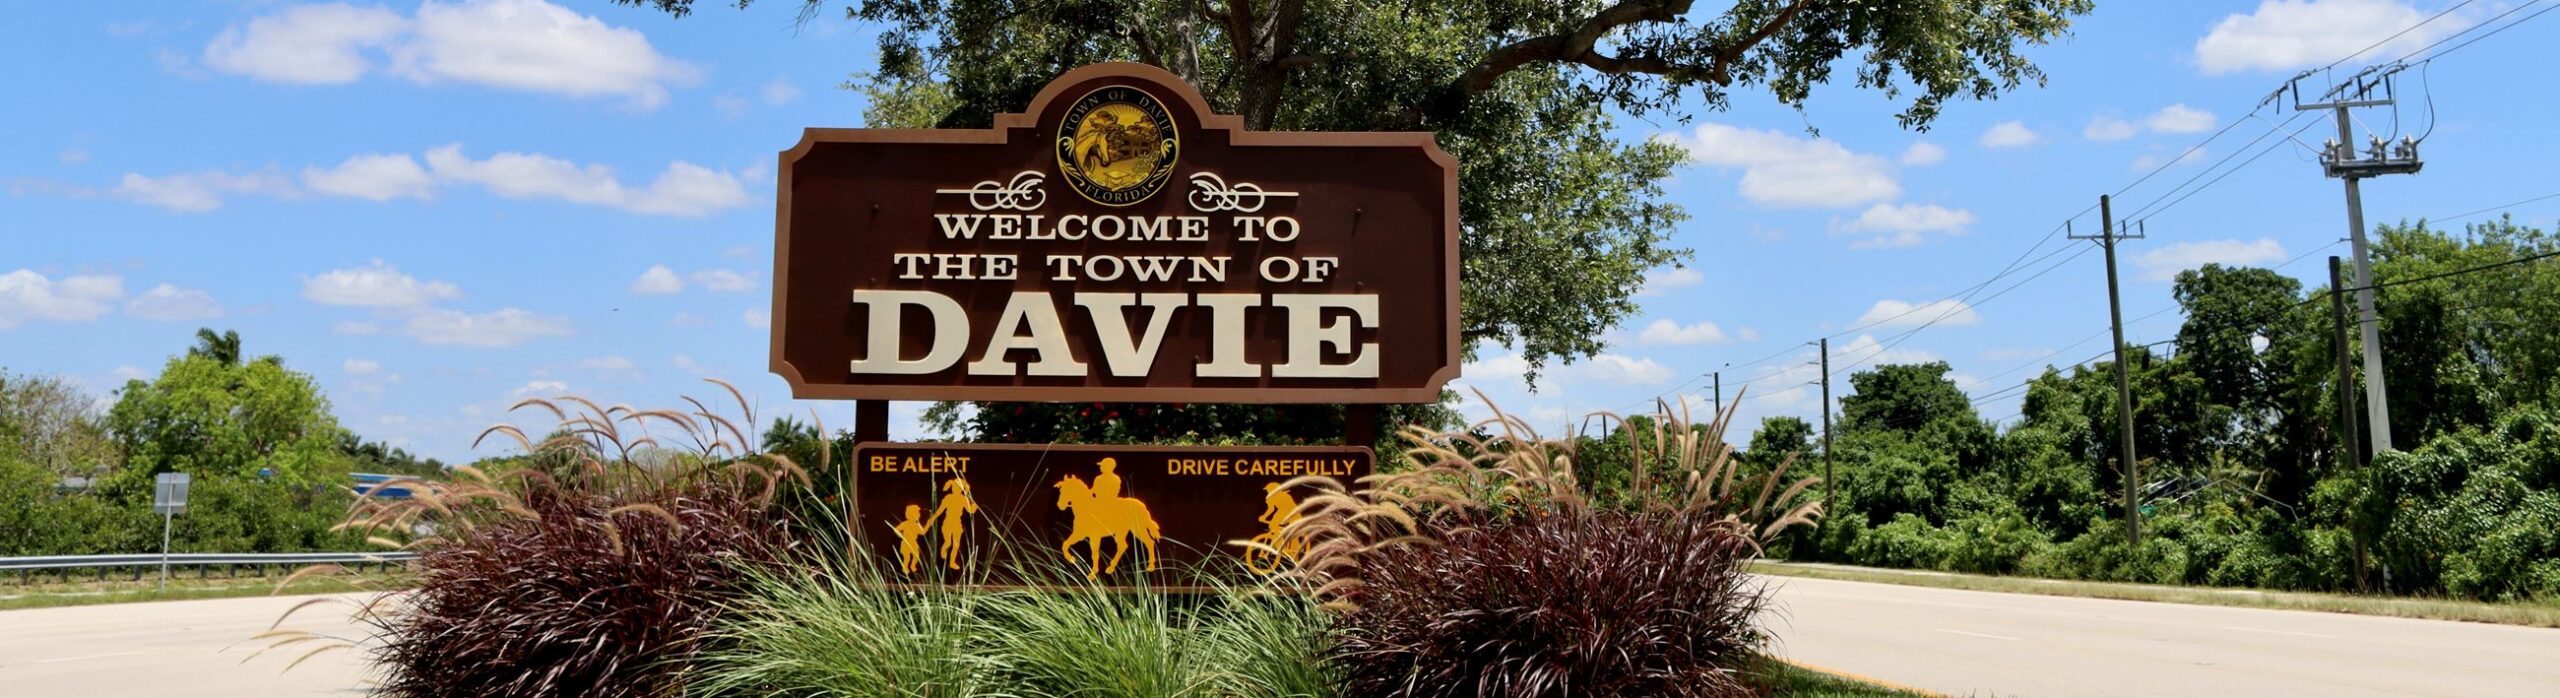 Bicycle Accidents in Davie, Florida